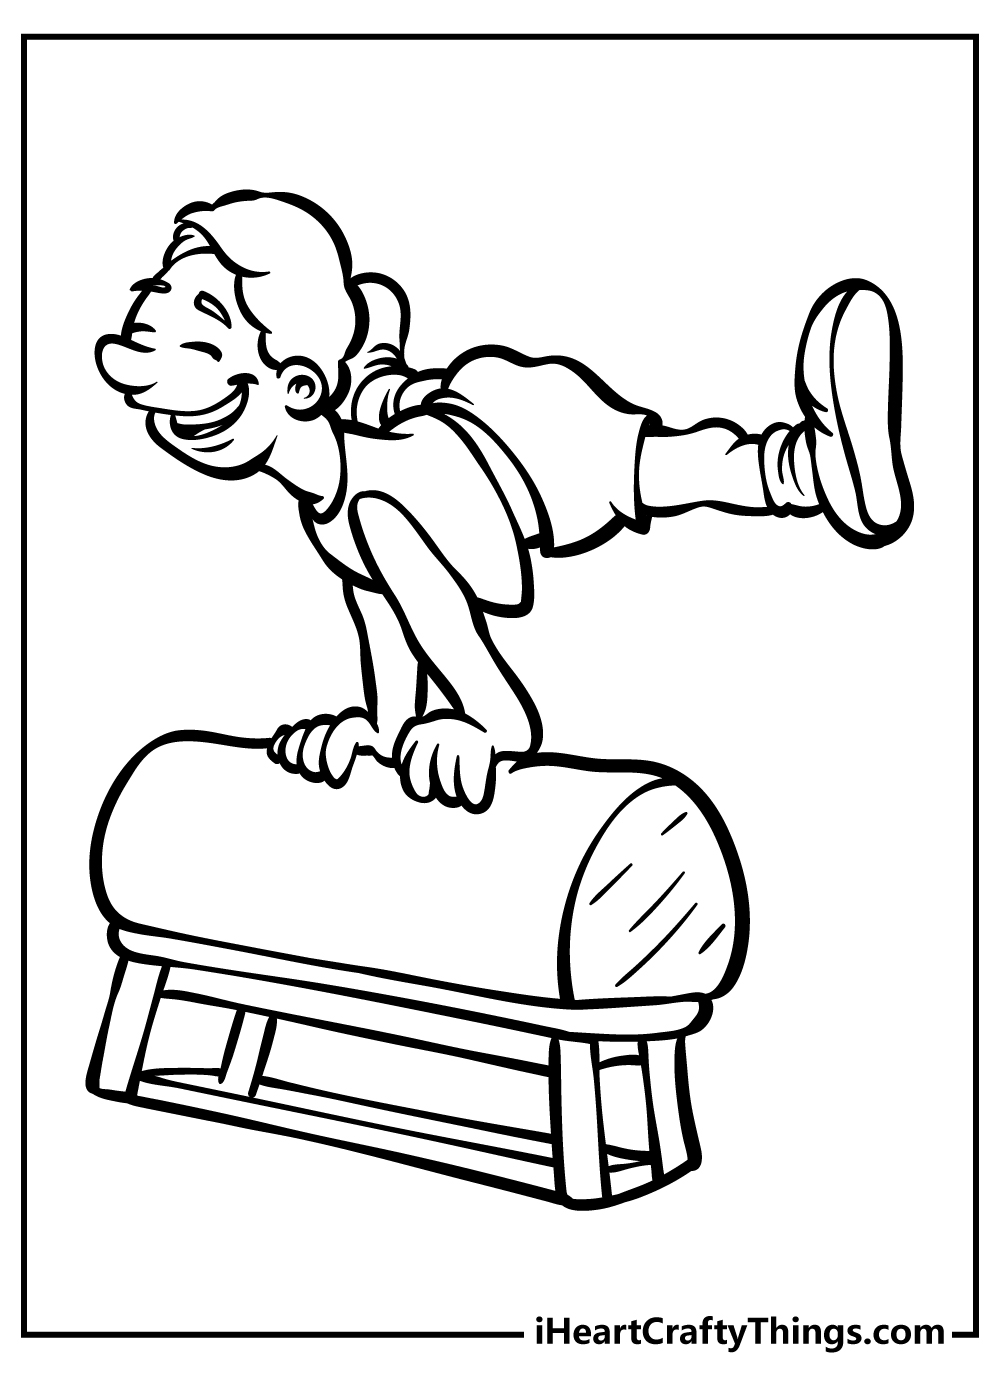 Gymnastics Coloring Pages for kids free download